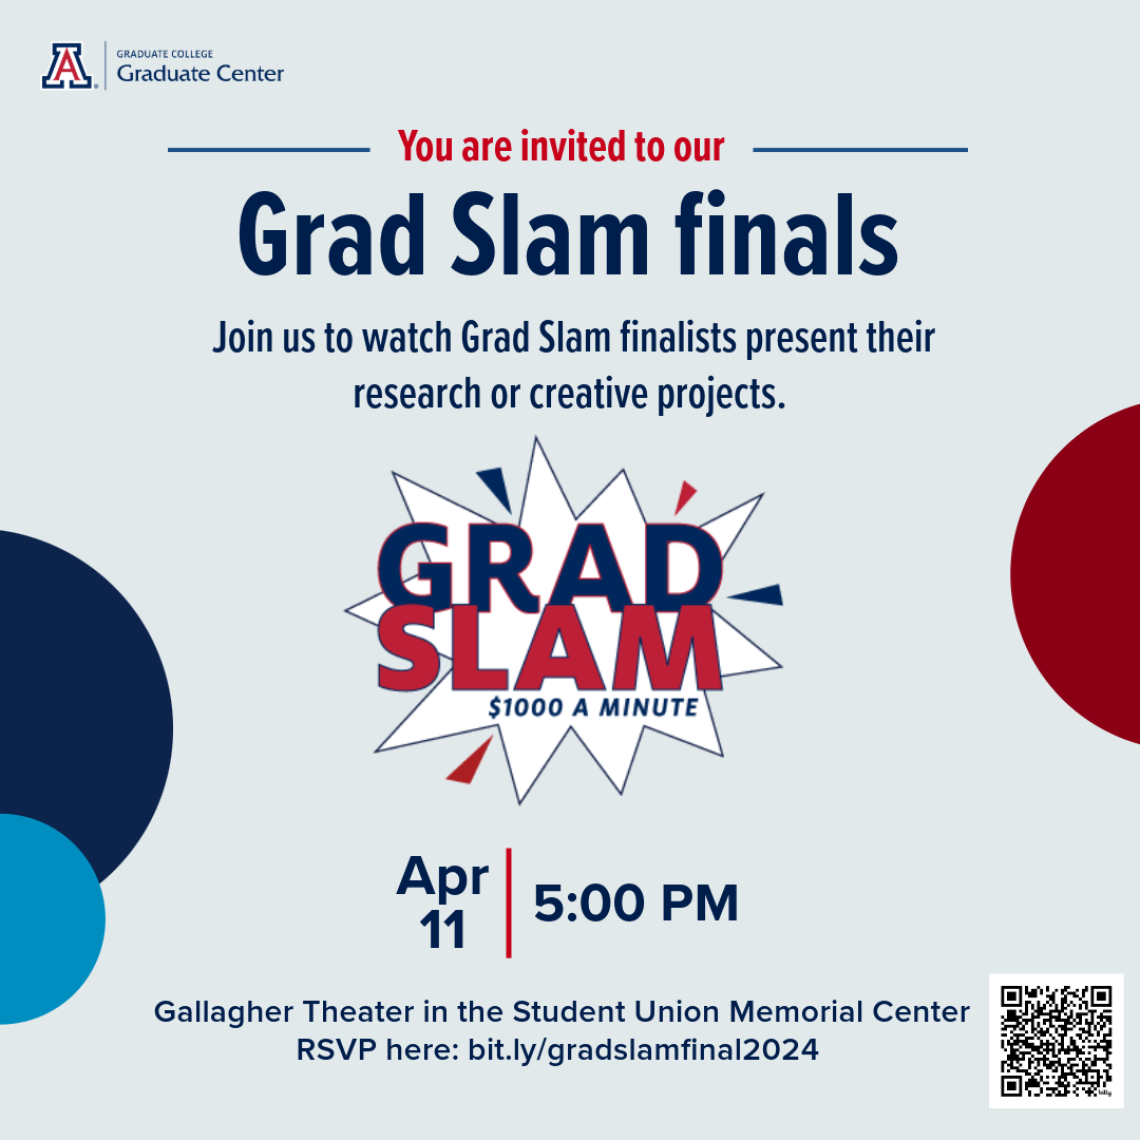 image with information regarding the Grad Slam Finals. Same information is provided below.  